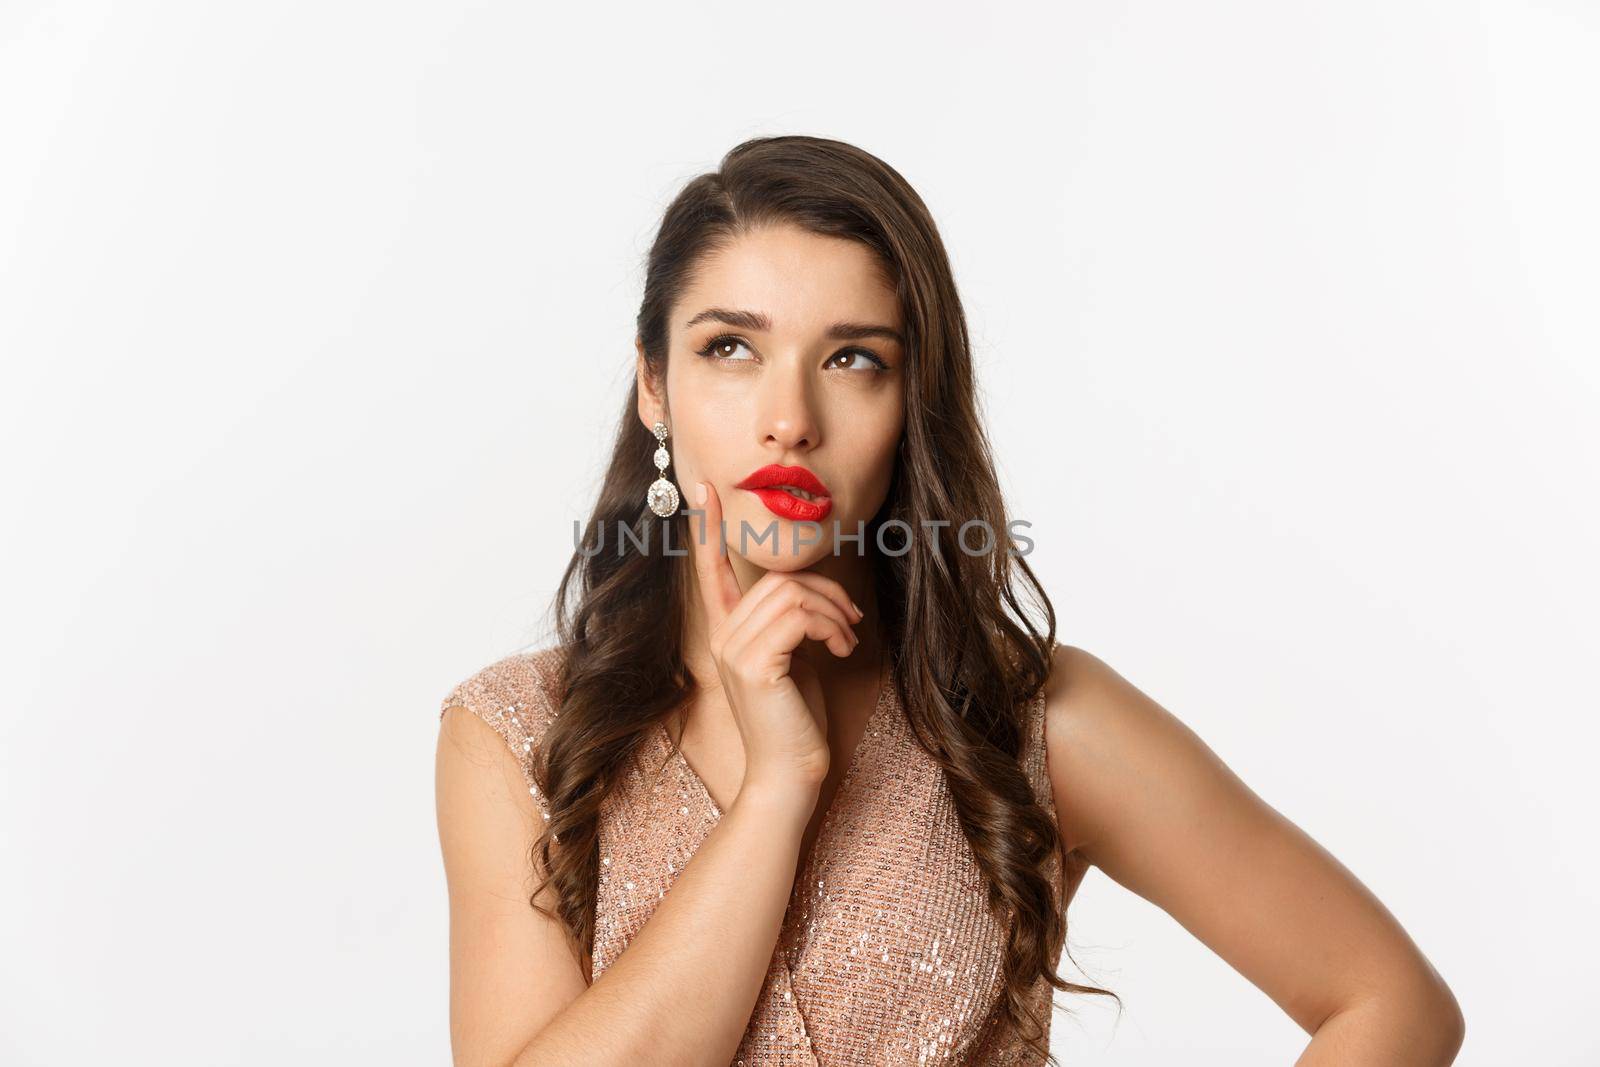 Concept of New Year celebration and winter holidays. Close-up of elegant woman with red lips and dress, looking at upper left corner and thinking, standing over white background.